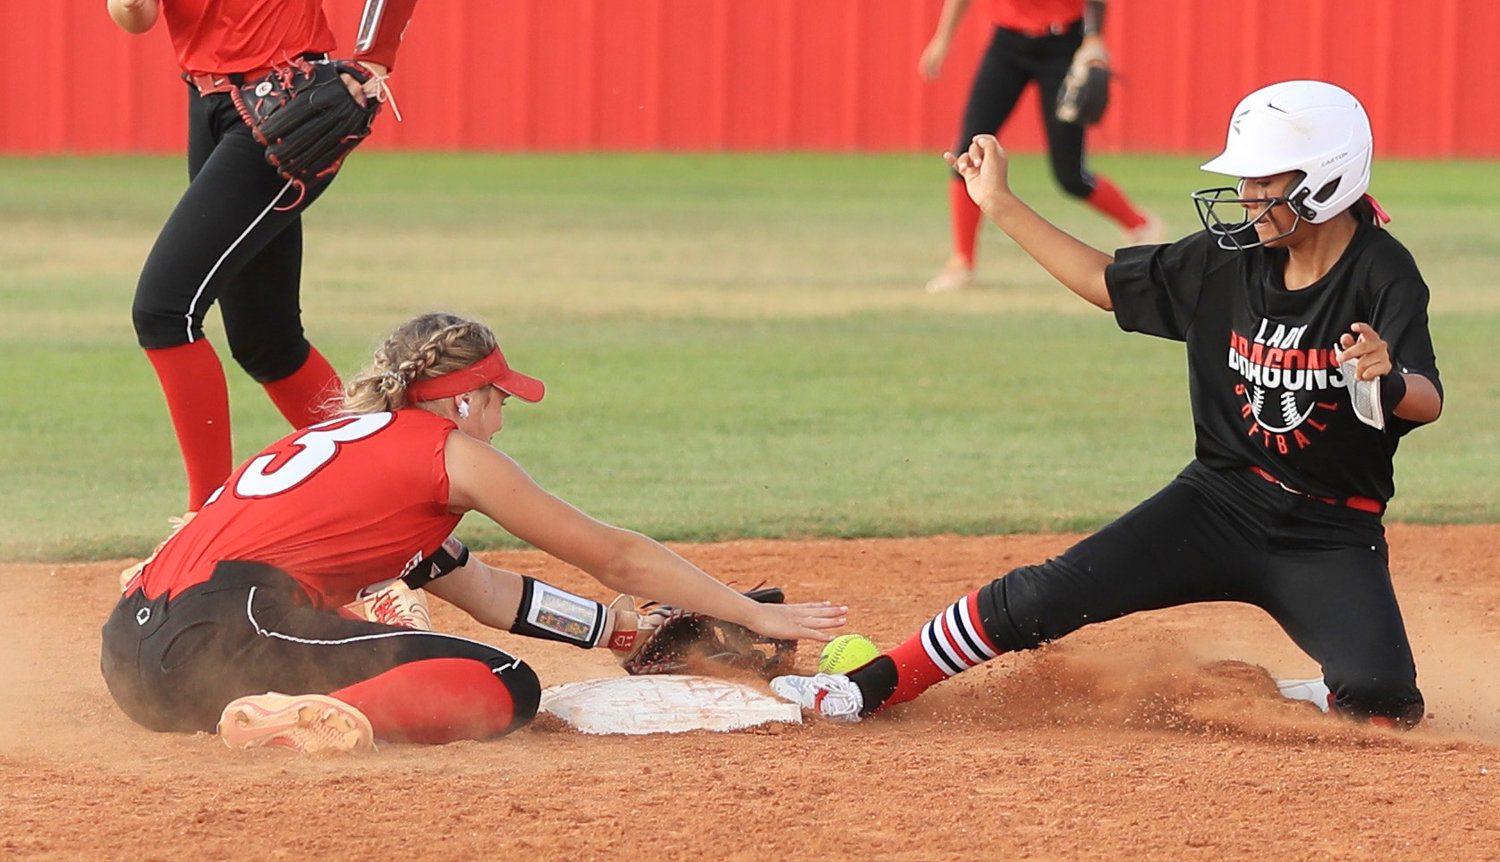 Purcell sophomore Kenna Esparza (right) narrowly steals second base before Washington senior Ellie Loveless can apply the tag. The Warriors defeated the Dragons 6-0.